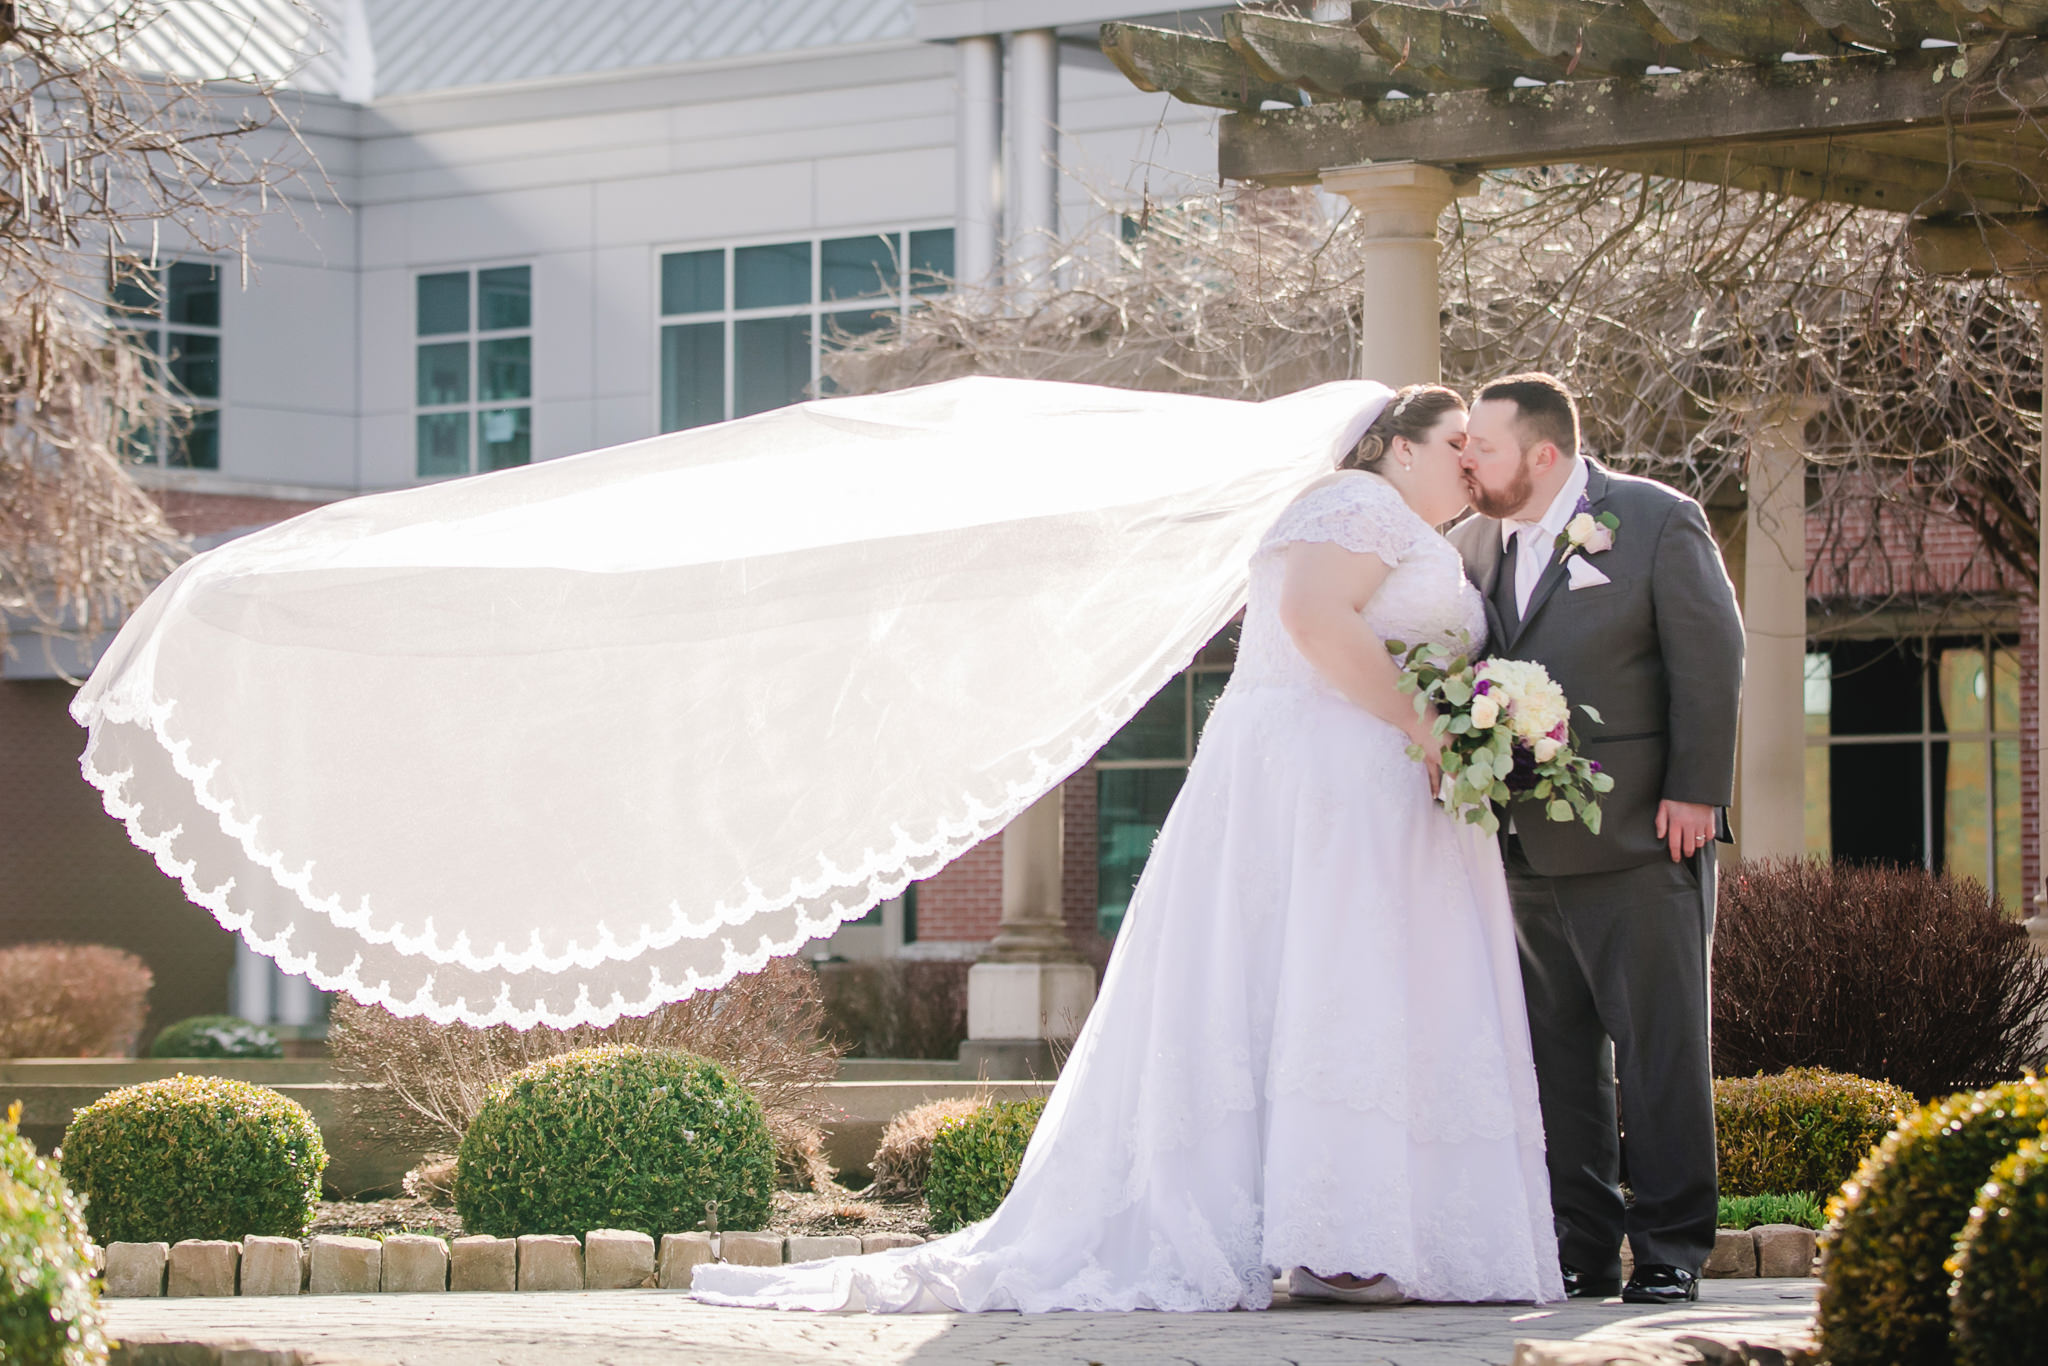 Bride's cathedral veil floats behind her as she kisses her groom at Robert Morris University